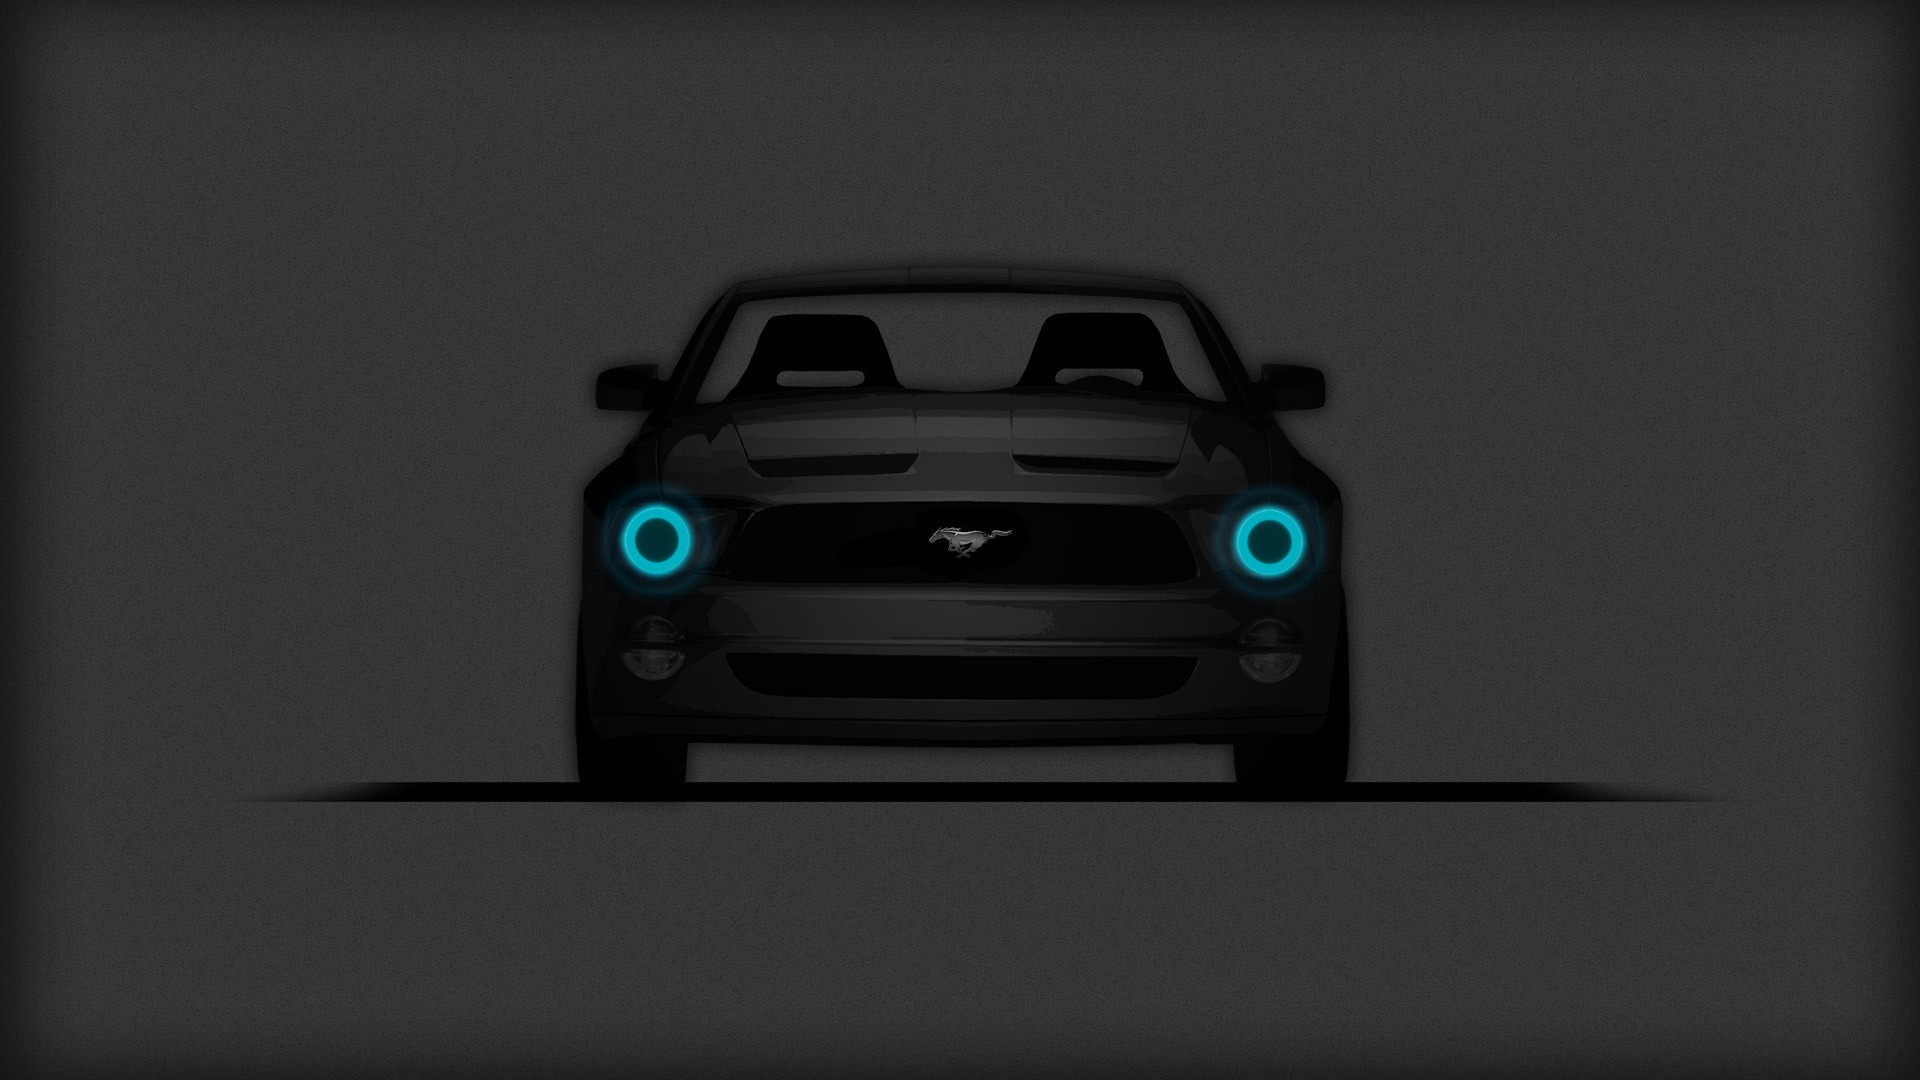 Ford Mustang, Ford Mustang GT, Car, Minimalism, Muscle Cars Wallpaper